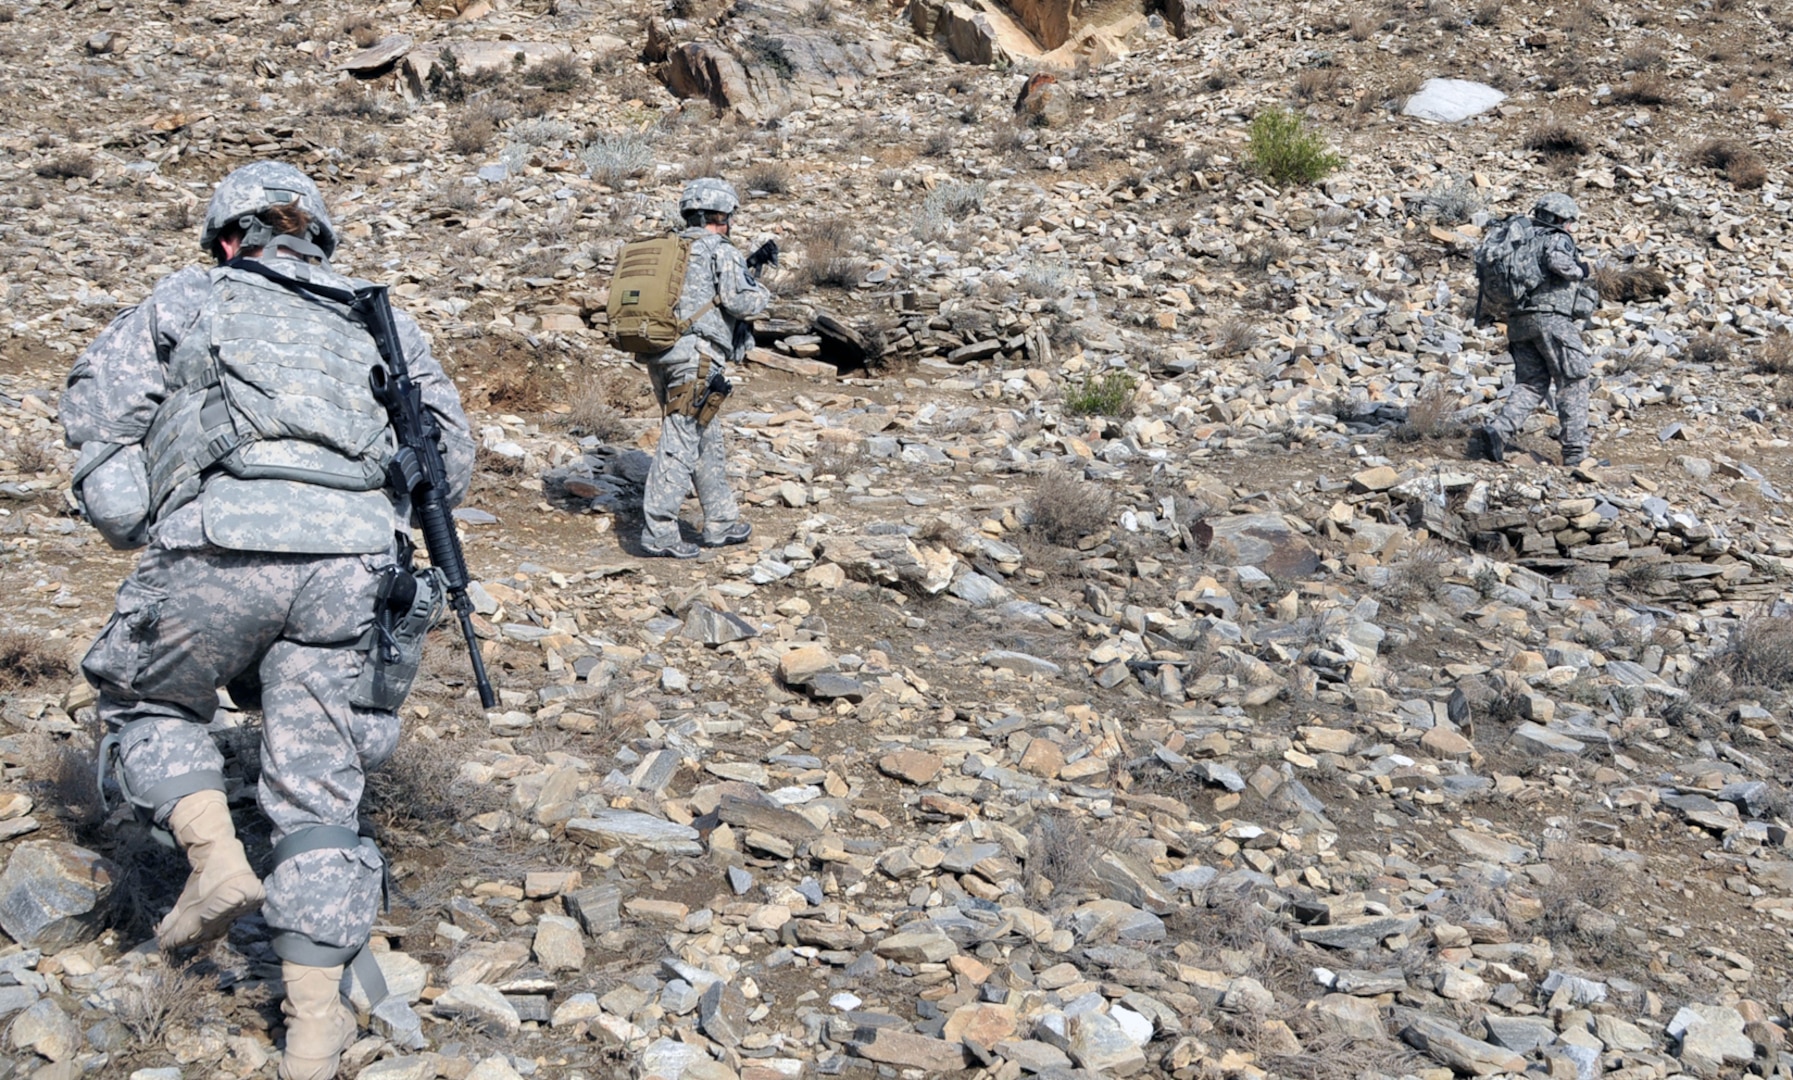 Redman and her team navigate a rugged terrain and walk and climb up steep
mountains to arrive at their destinations in Afghanistan.
Photo by Army Capt. Peter Shinn